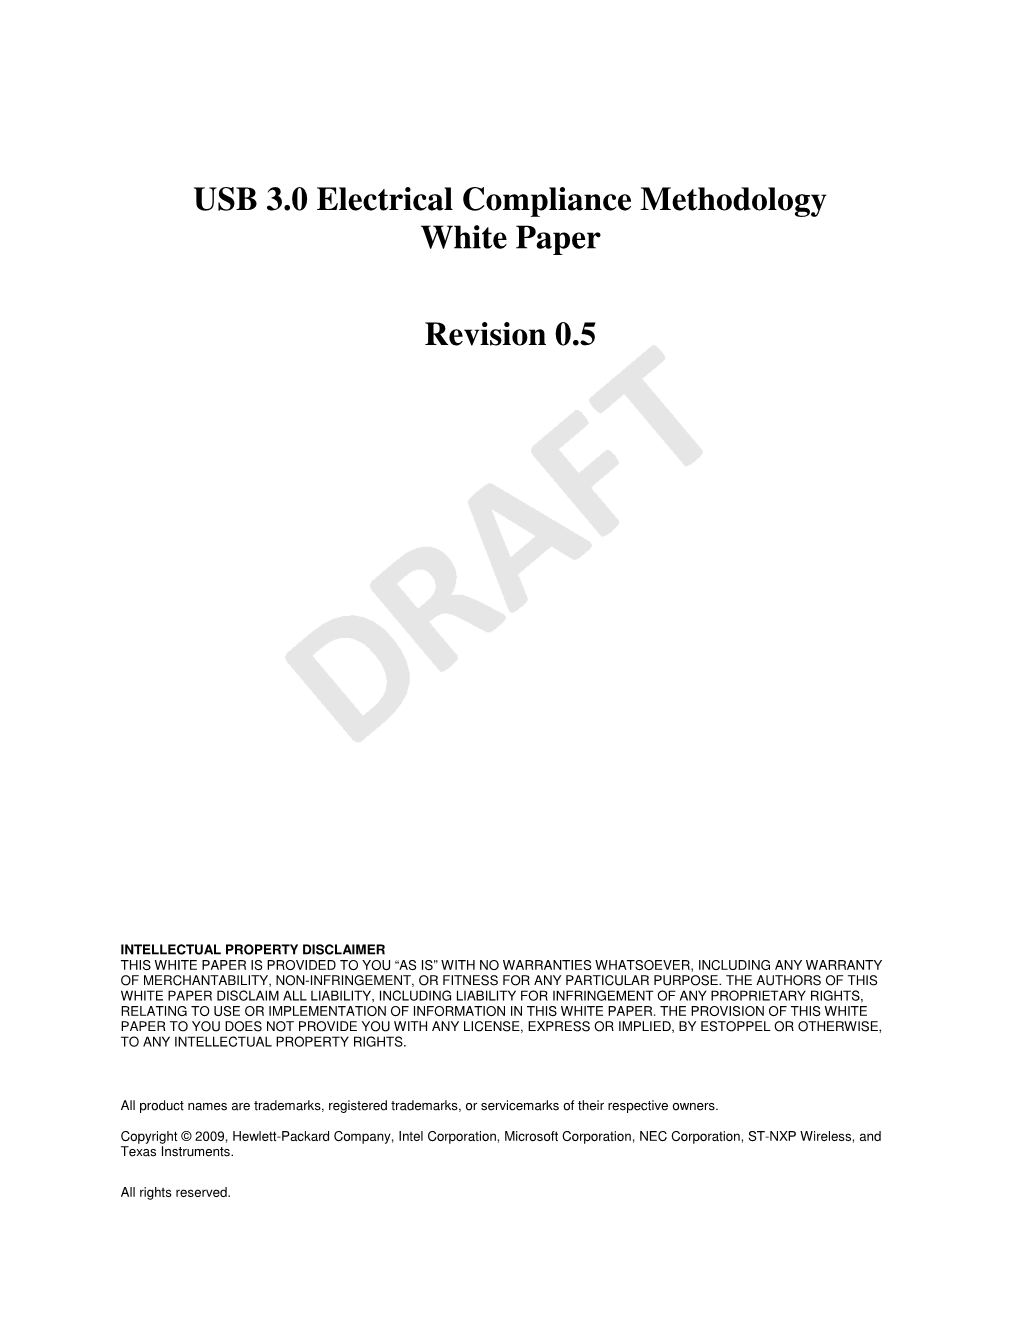 USB 3.0 Electrical Compliance Methodology White Paper Revision